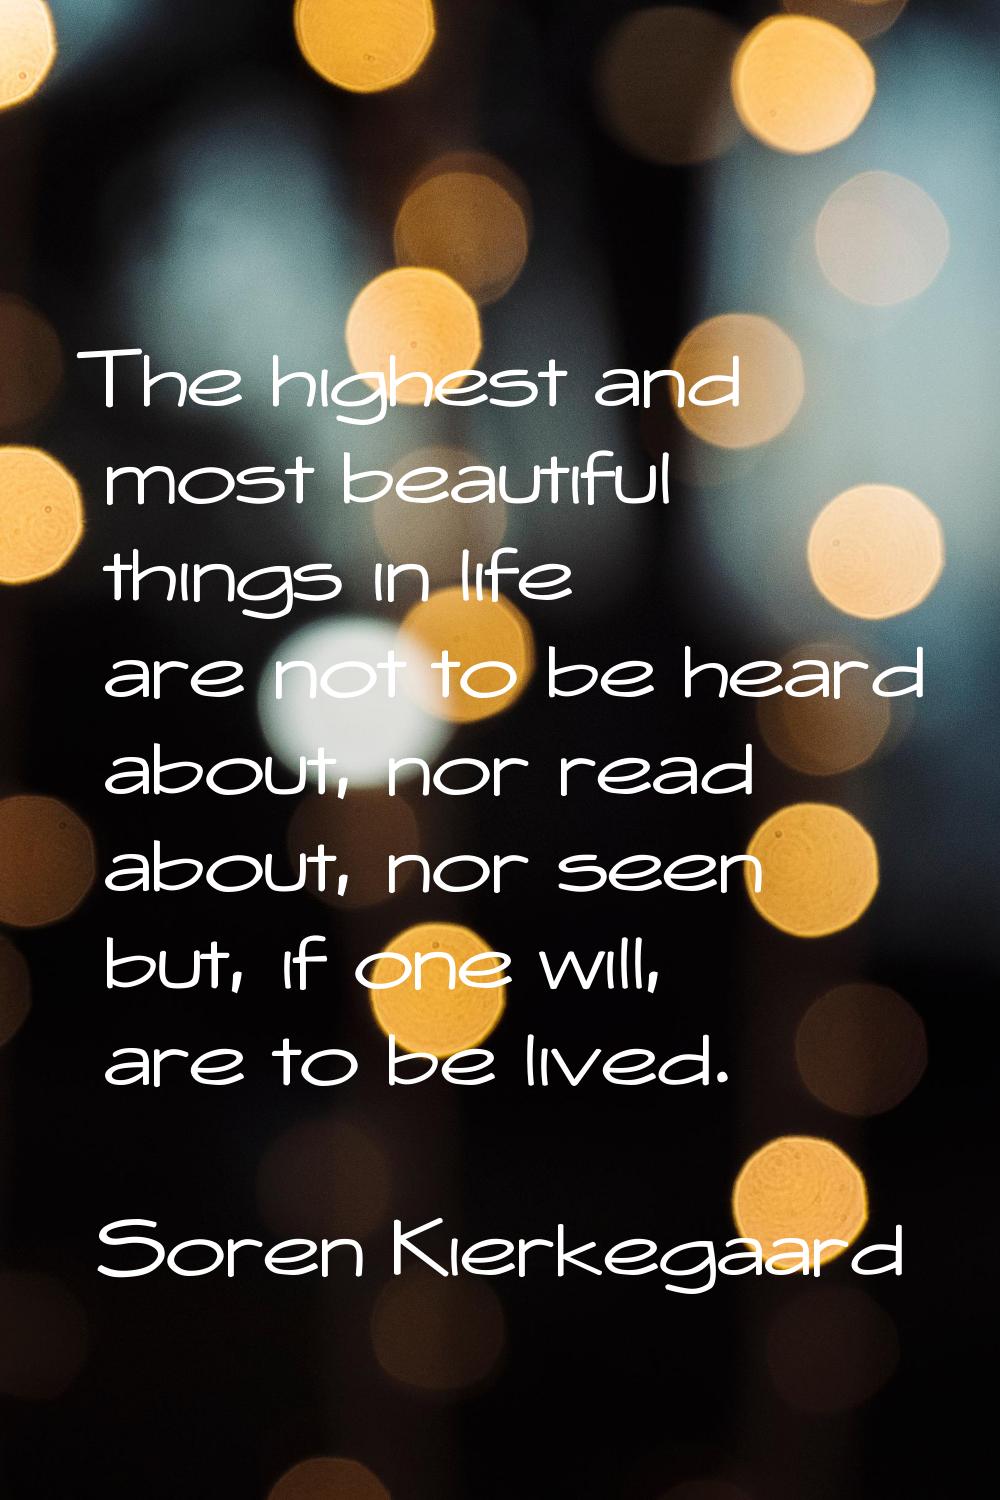 The highest and most beautiful things in life are not to be heard about, nor read about, nor seen b